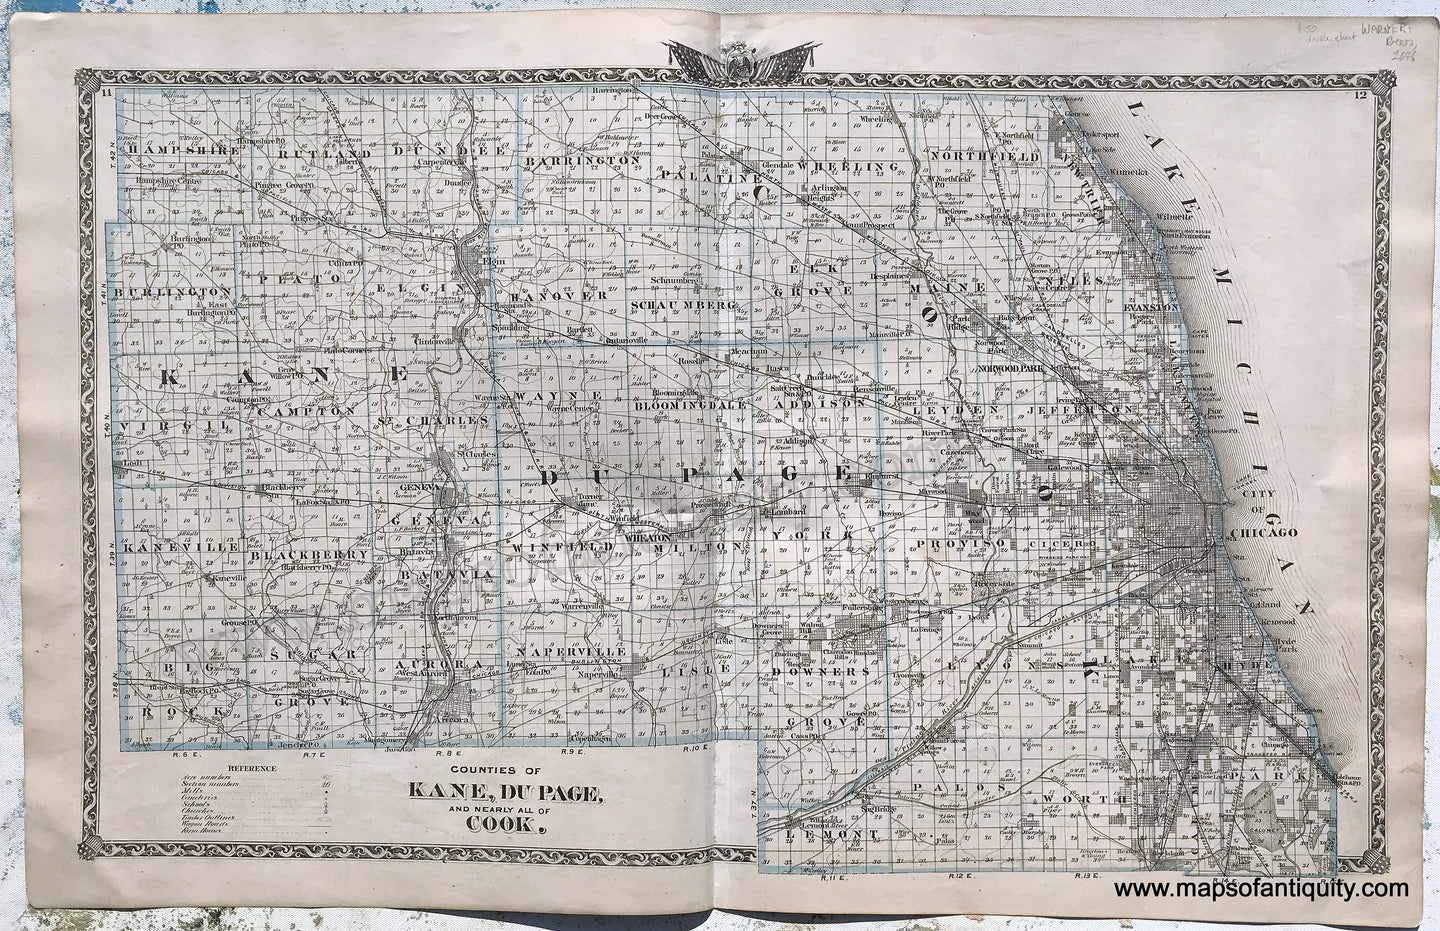 Antique-Hand-Colored-Map-Double-sided-sheet-with-multiple-maps:-centerfold--Counties-of-Kane-Du-Page-and-nearly-all-of-Cook;-versos:-Map-of-Chicago-City-/-Aurora-Naperville-and-Wheaton-Illinois-1876-Warner-&-Beers-/-Union-Atlas-Co.-Midwest-1800s-19th-century-Maps-of-Antiquity